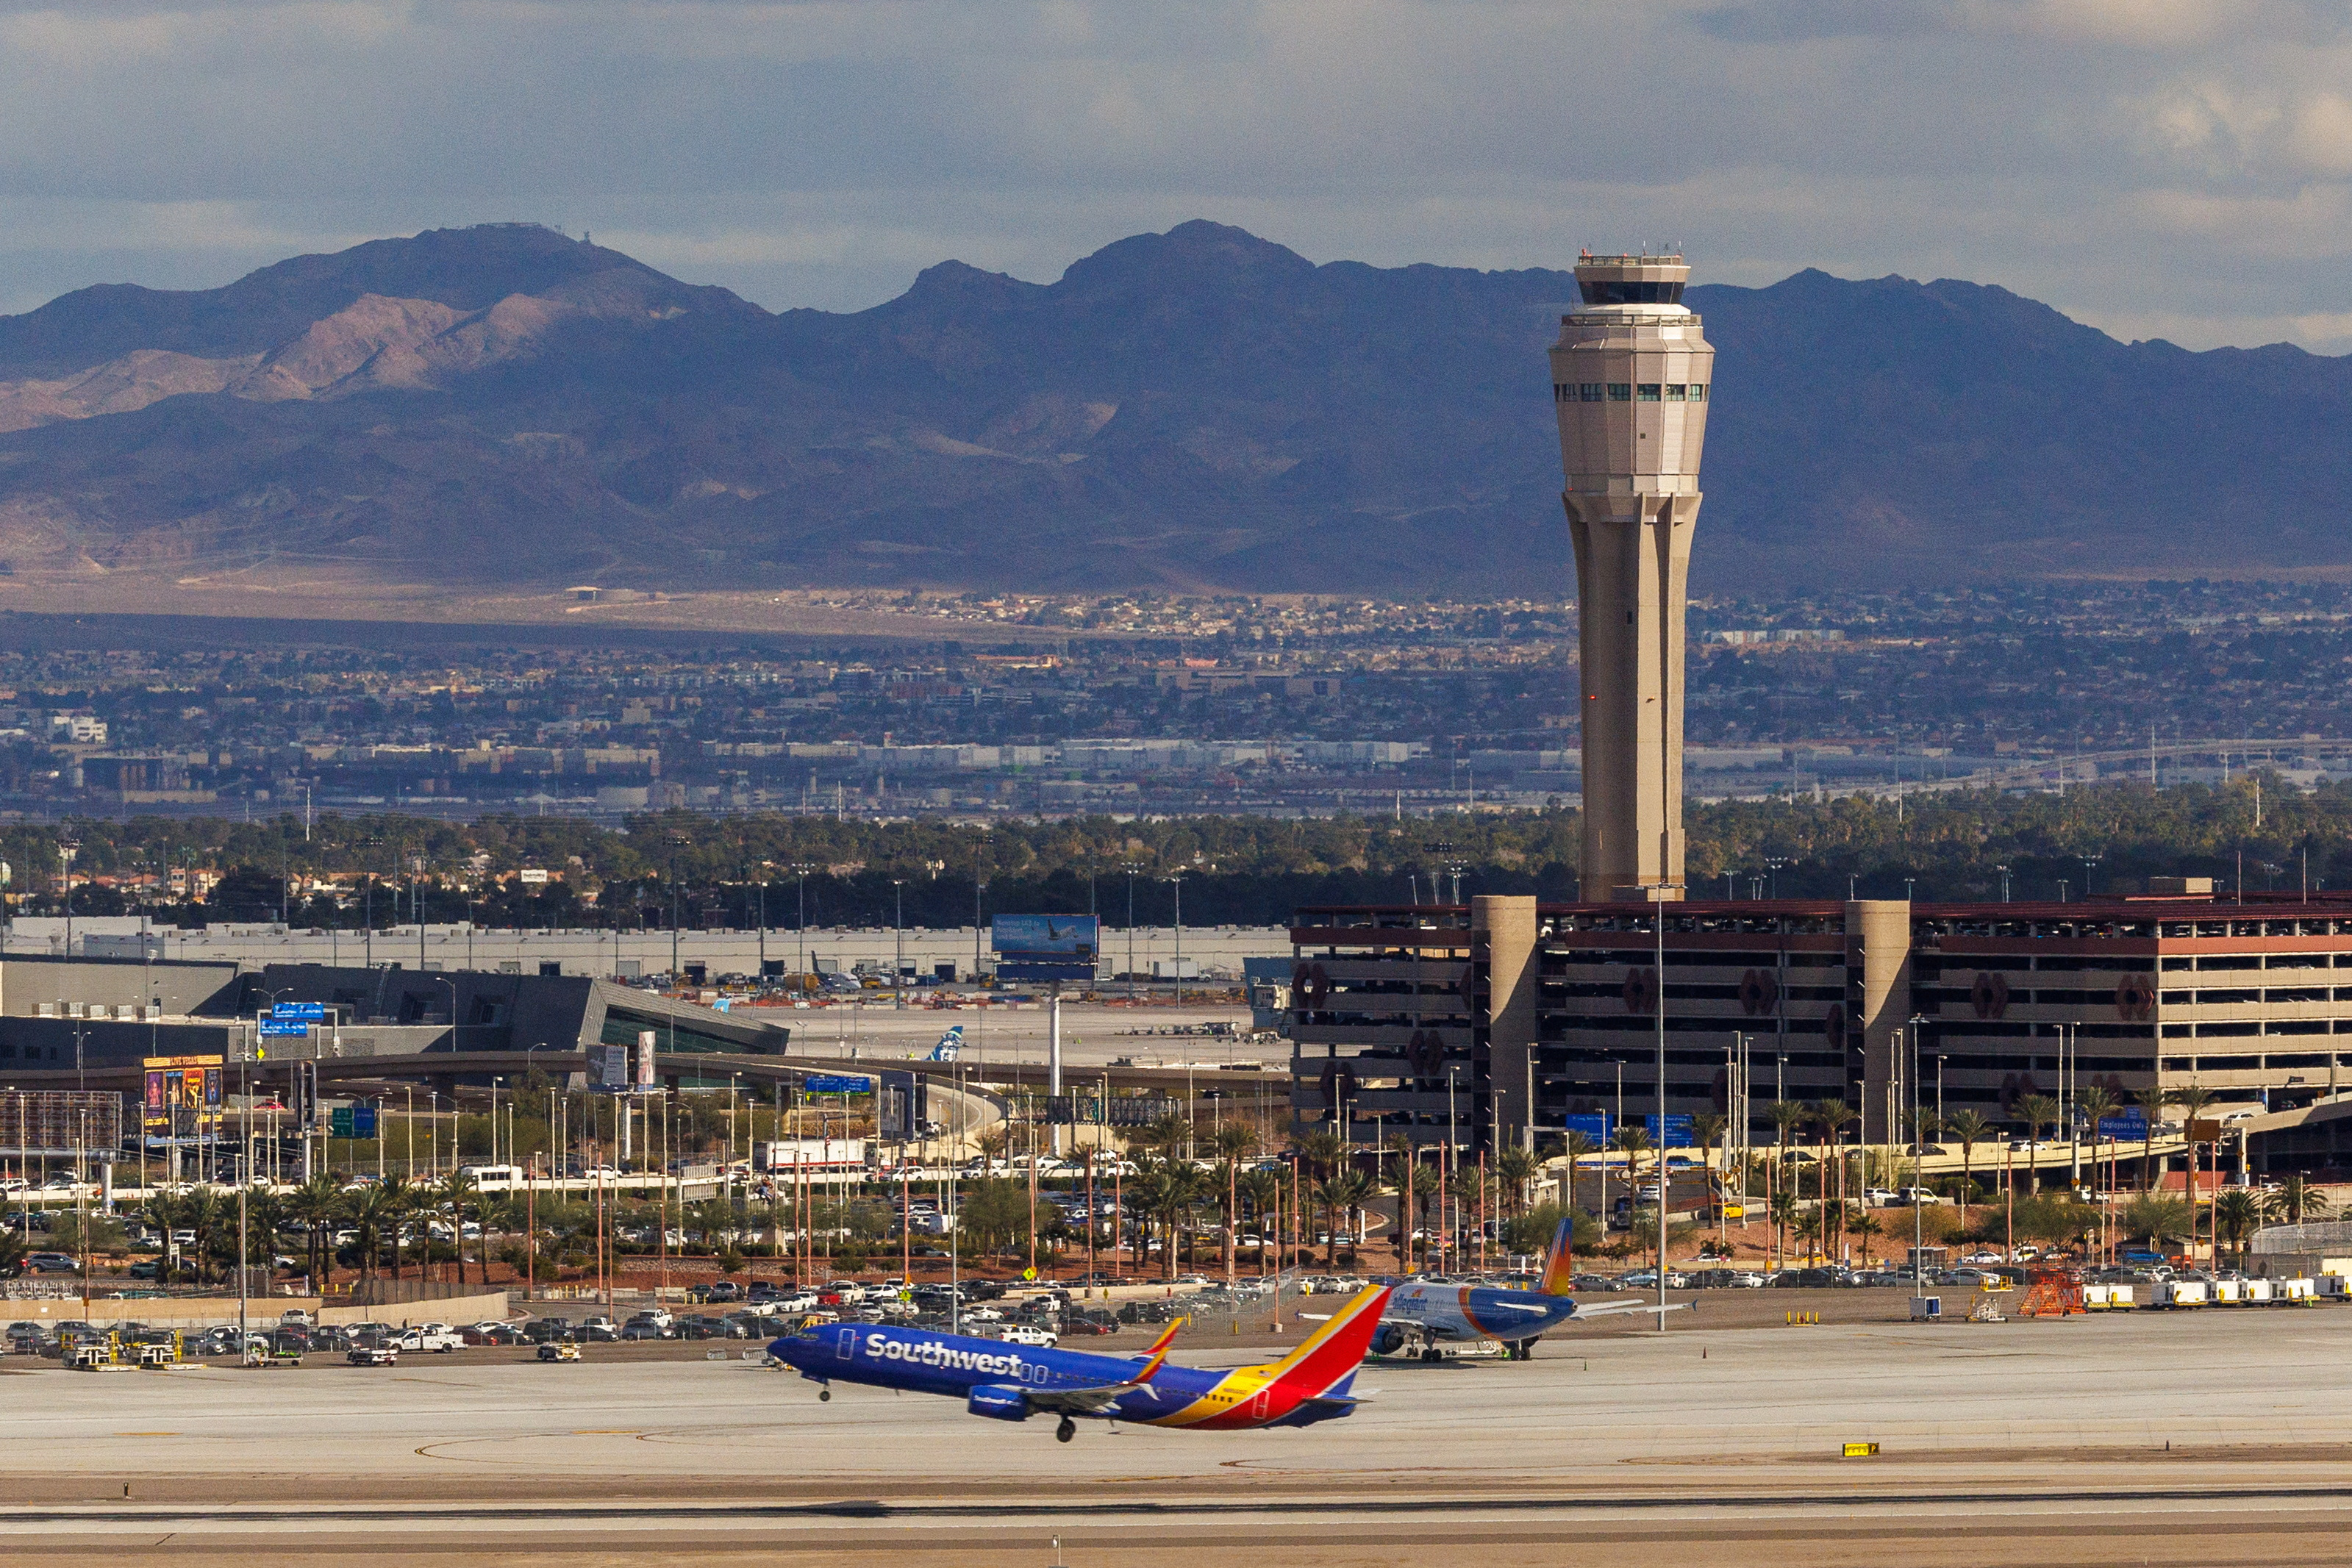 A Southwest airliner takes off from Las Vegas